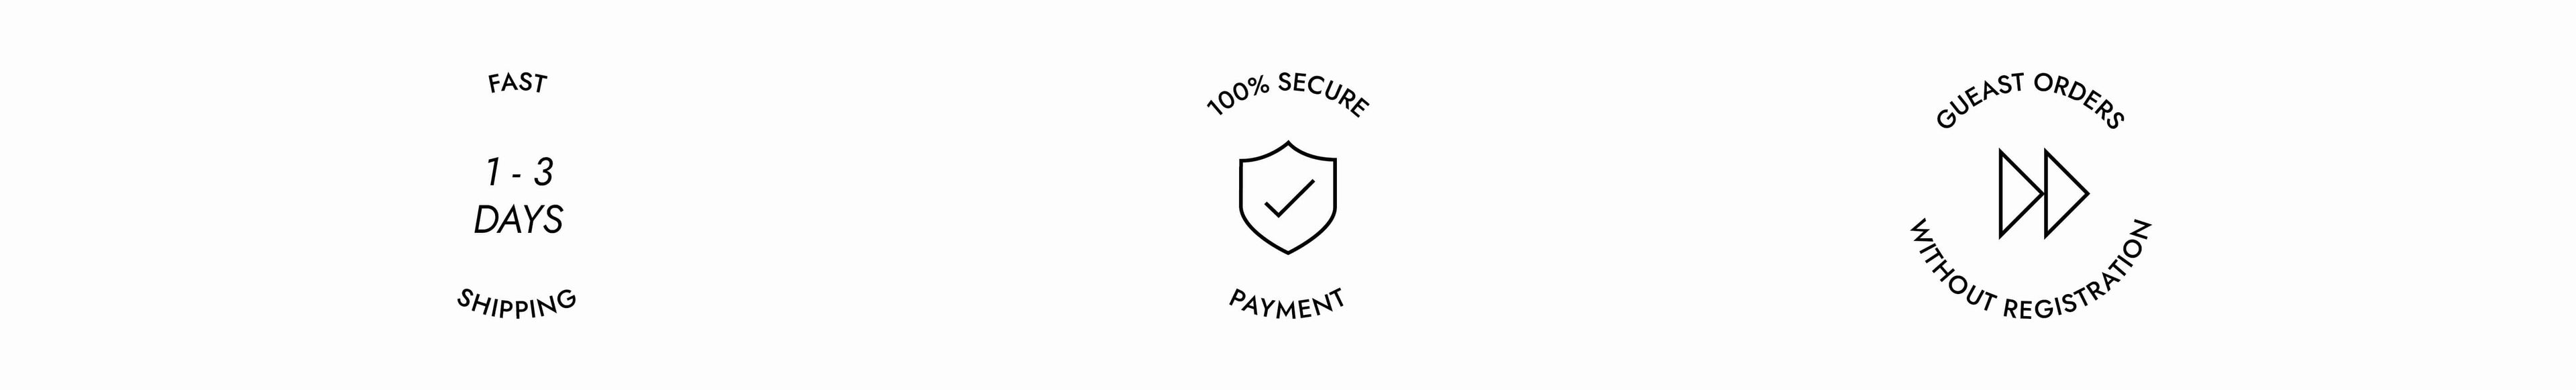 Beschreibende Icons: fast delivery, 100% secure payment and guest orders without registration - desktop